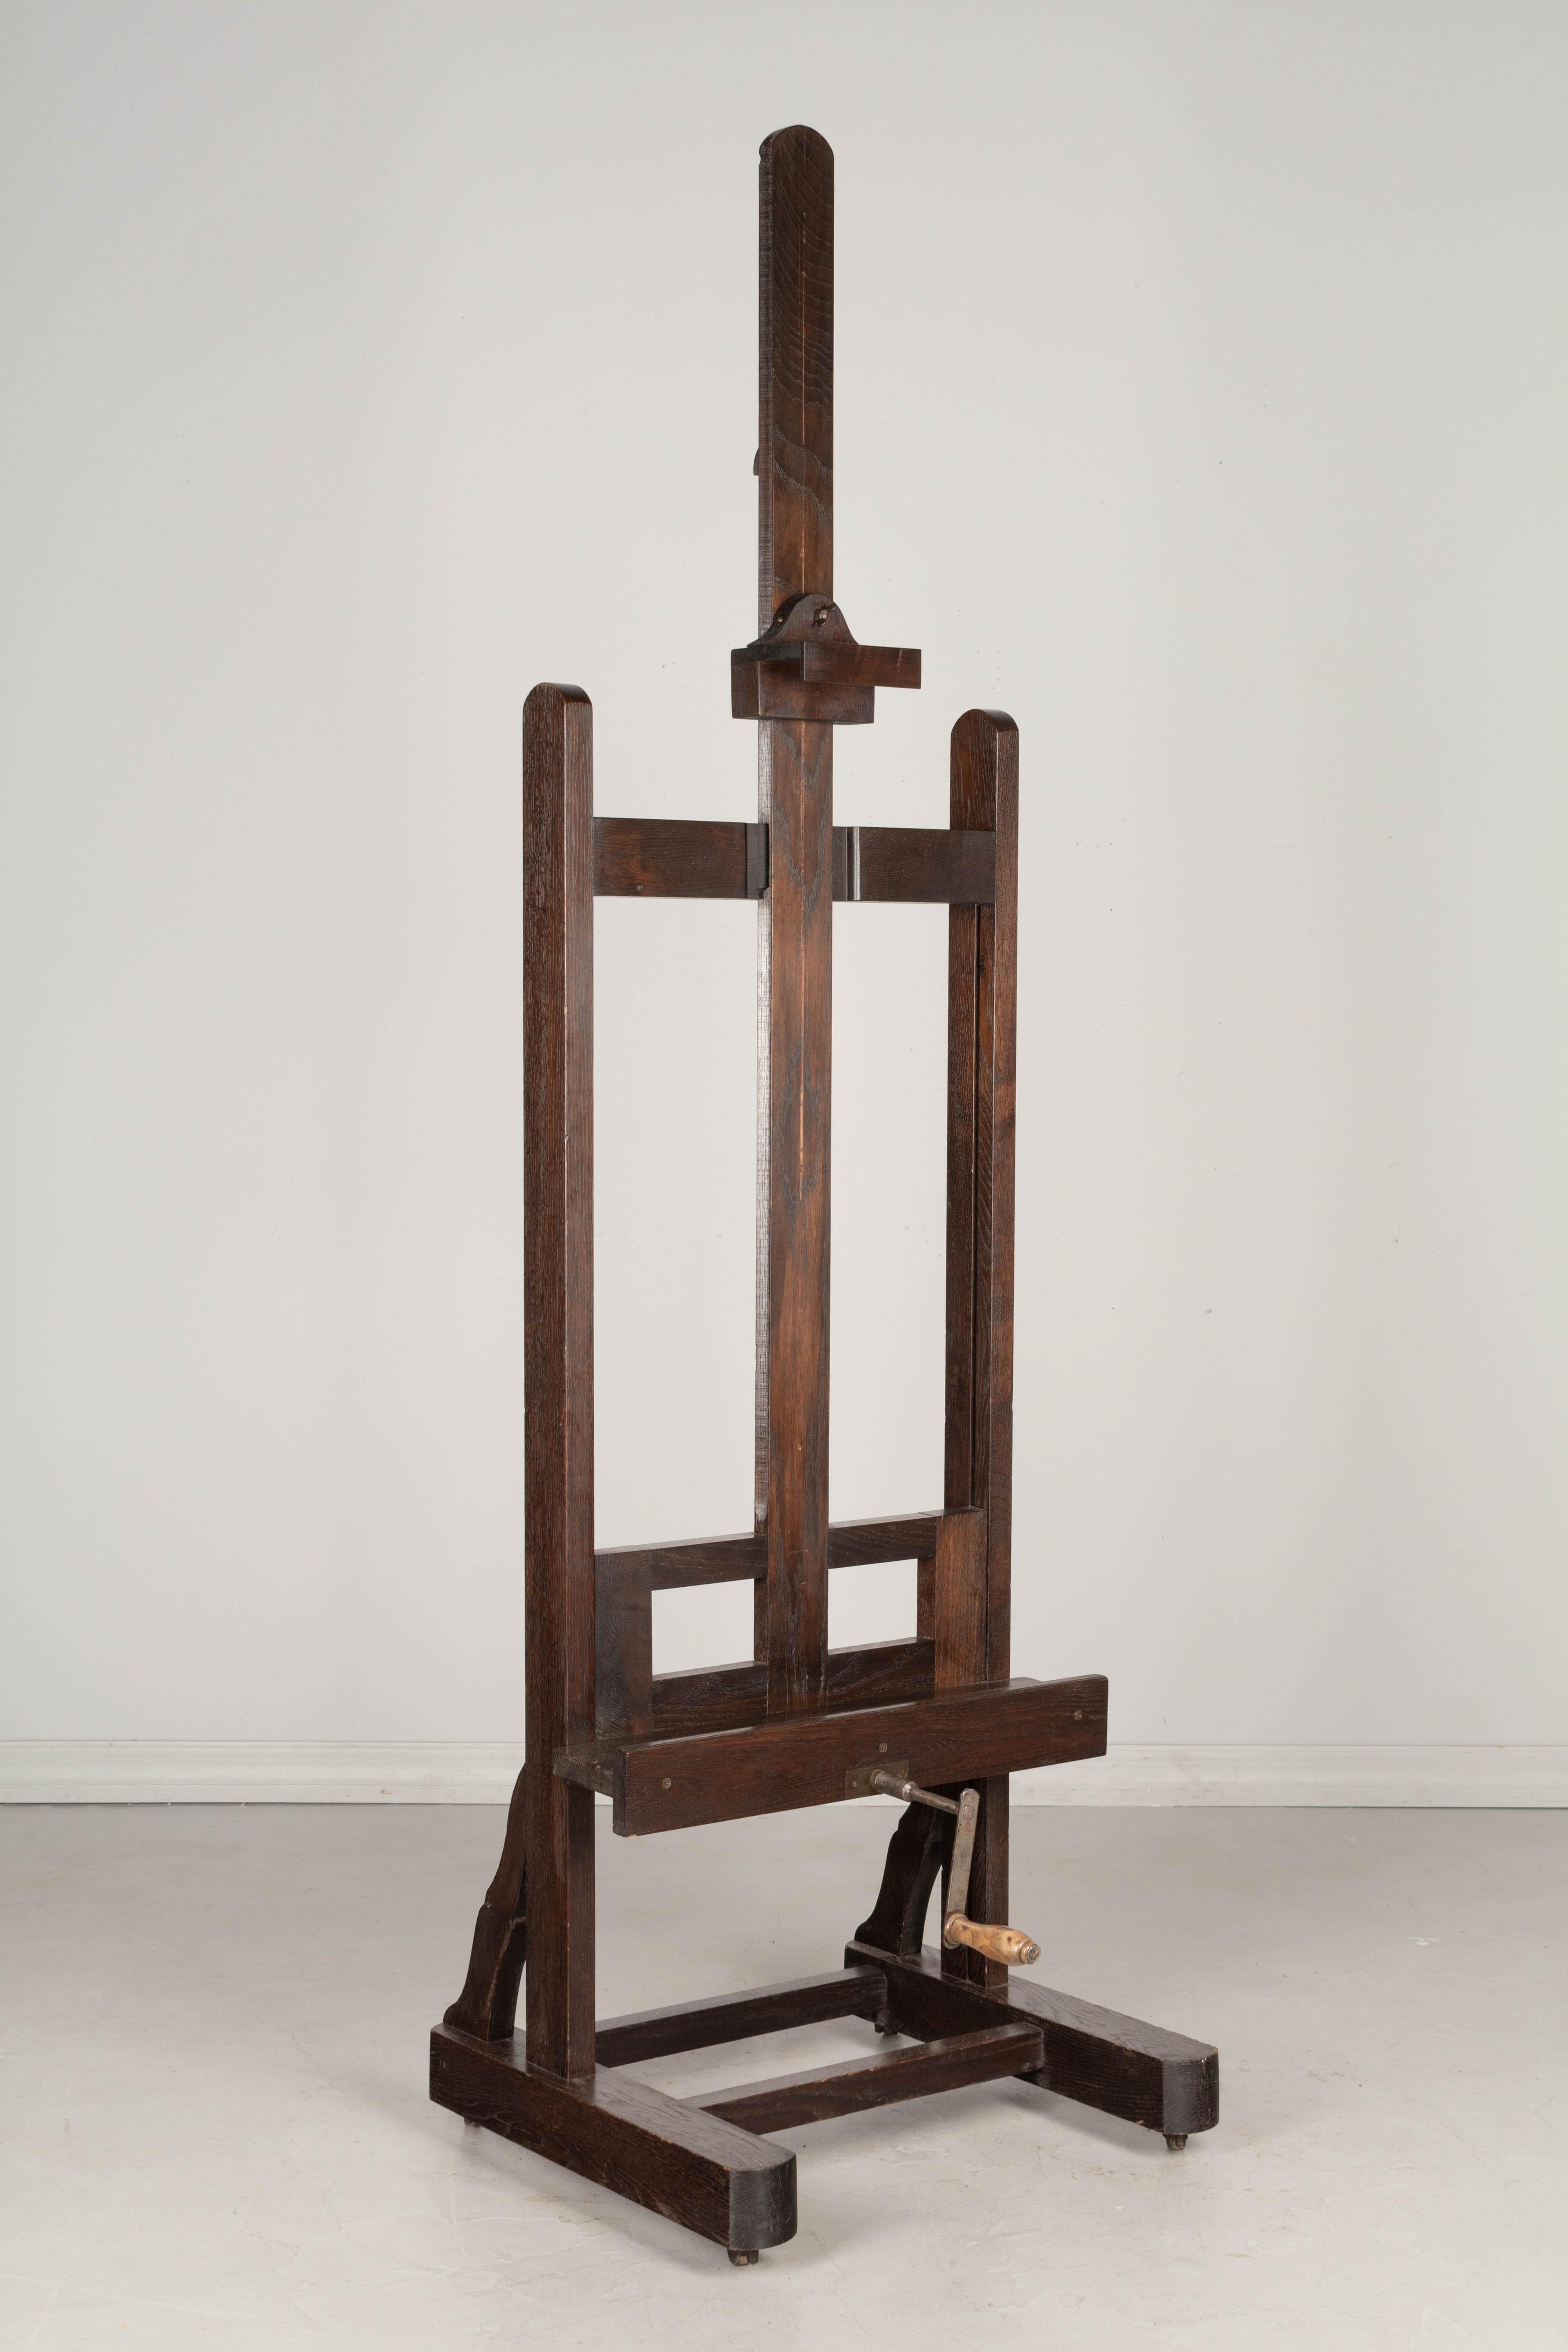 A French painter's easel made of solid oak with threaded rod, cast iron gear and turned wood handled crank. A deep ledge and a new adjustable bracket at the top securely holds the painting in place. Very sturdy base with original castors. Small